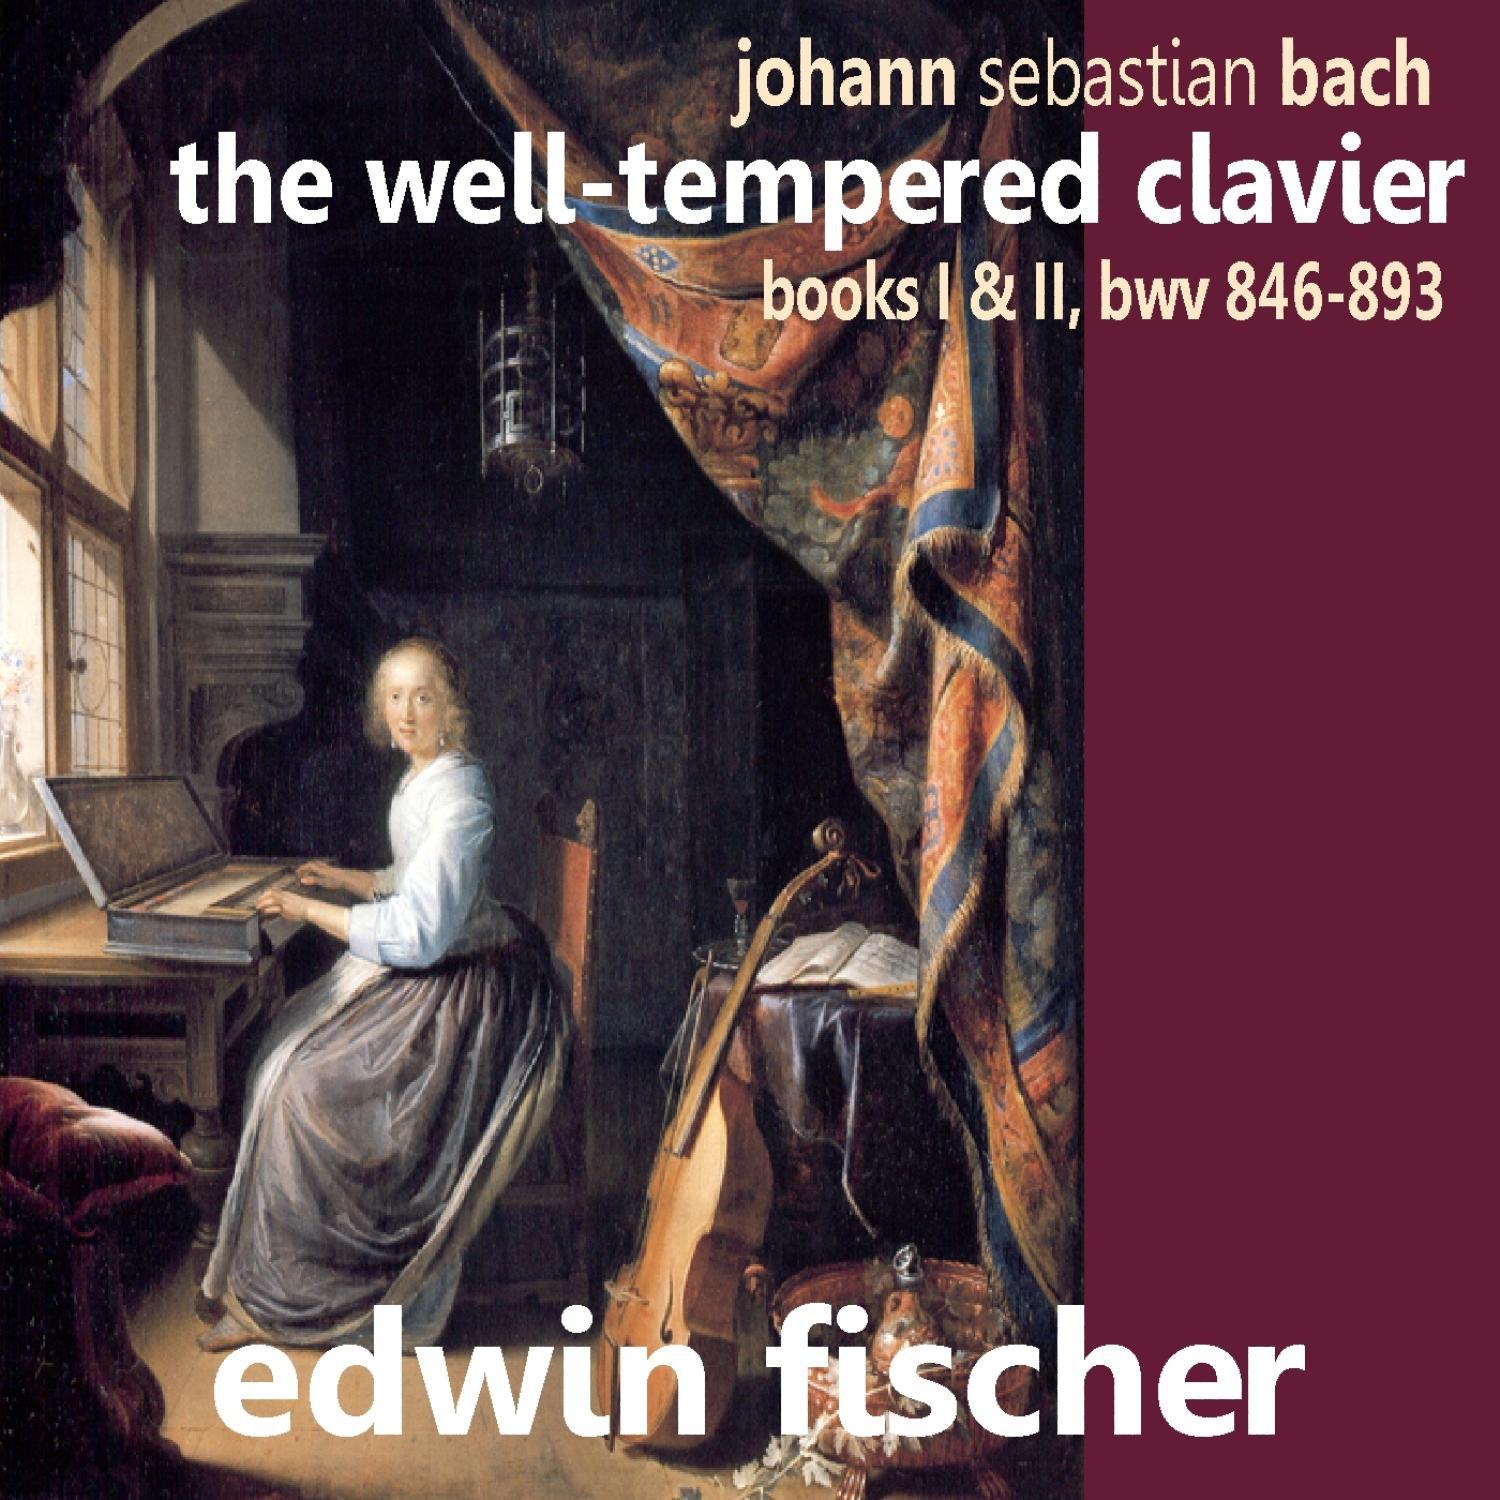 Book I, Prelude and Fugue No. 17 in A Flat Major, BWV 862